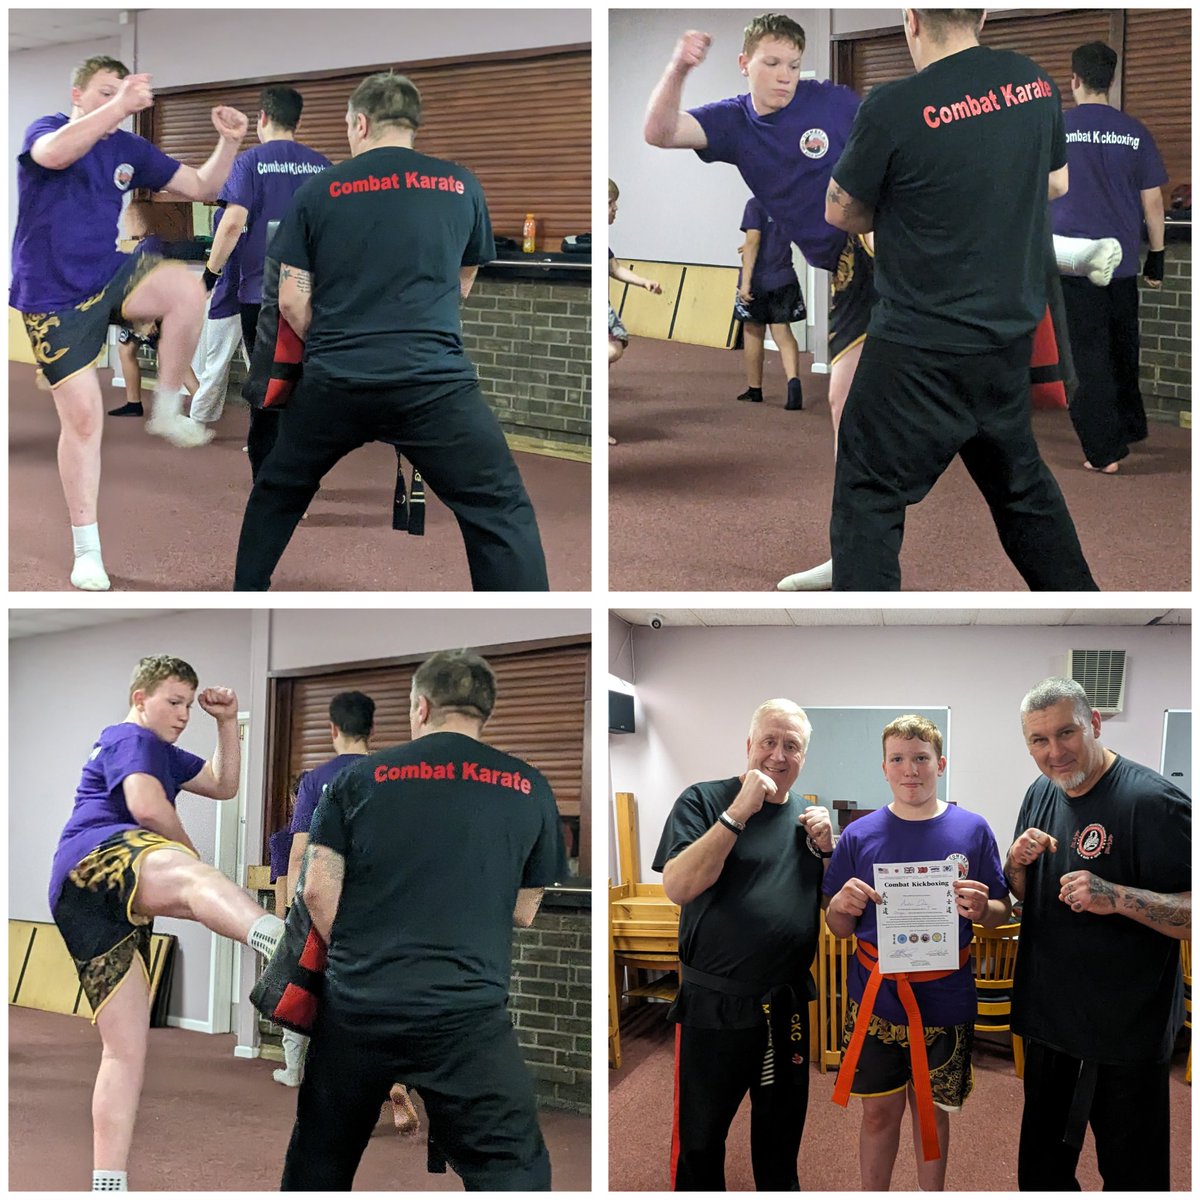 So yesterday just under 6 months after having his stroke, and 2 months of attending Combat Kickboxing, Austin had his first ever kickboxing grading and is now officially an orange belt Kickboxer 🧡🦵🥊
#kickboxing #strokevictim #strokesurvivor